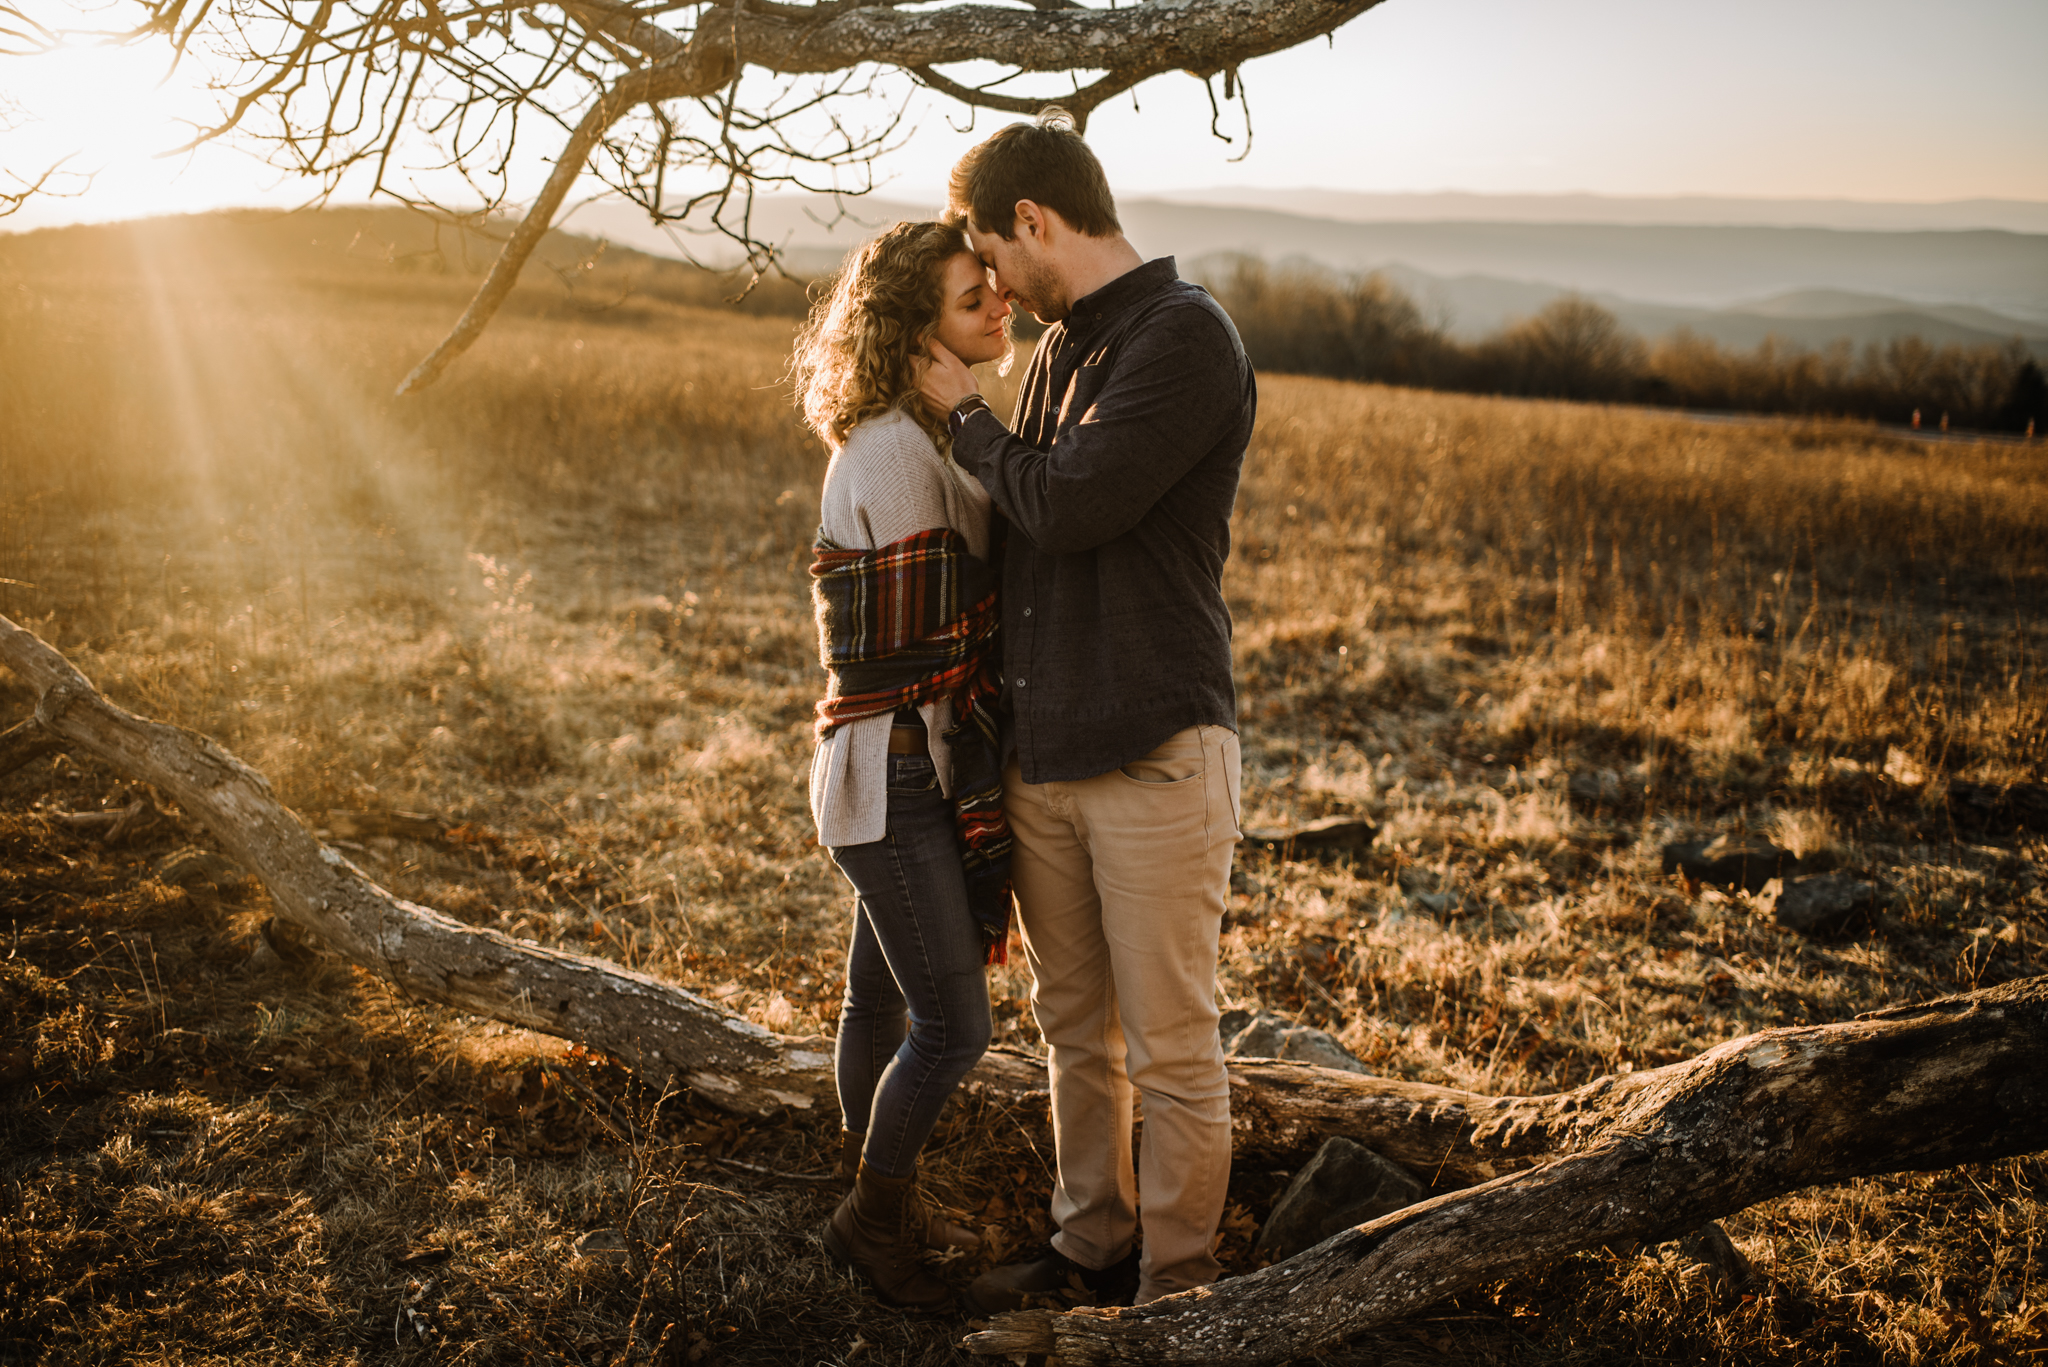 Alli and Mitchell - Shenandoah National Park Adventure Winter Engagement Session on Skyline Drive - White Sails Creative Elopement Photography_49.JPG